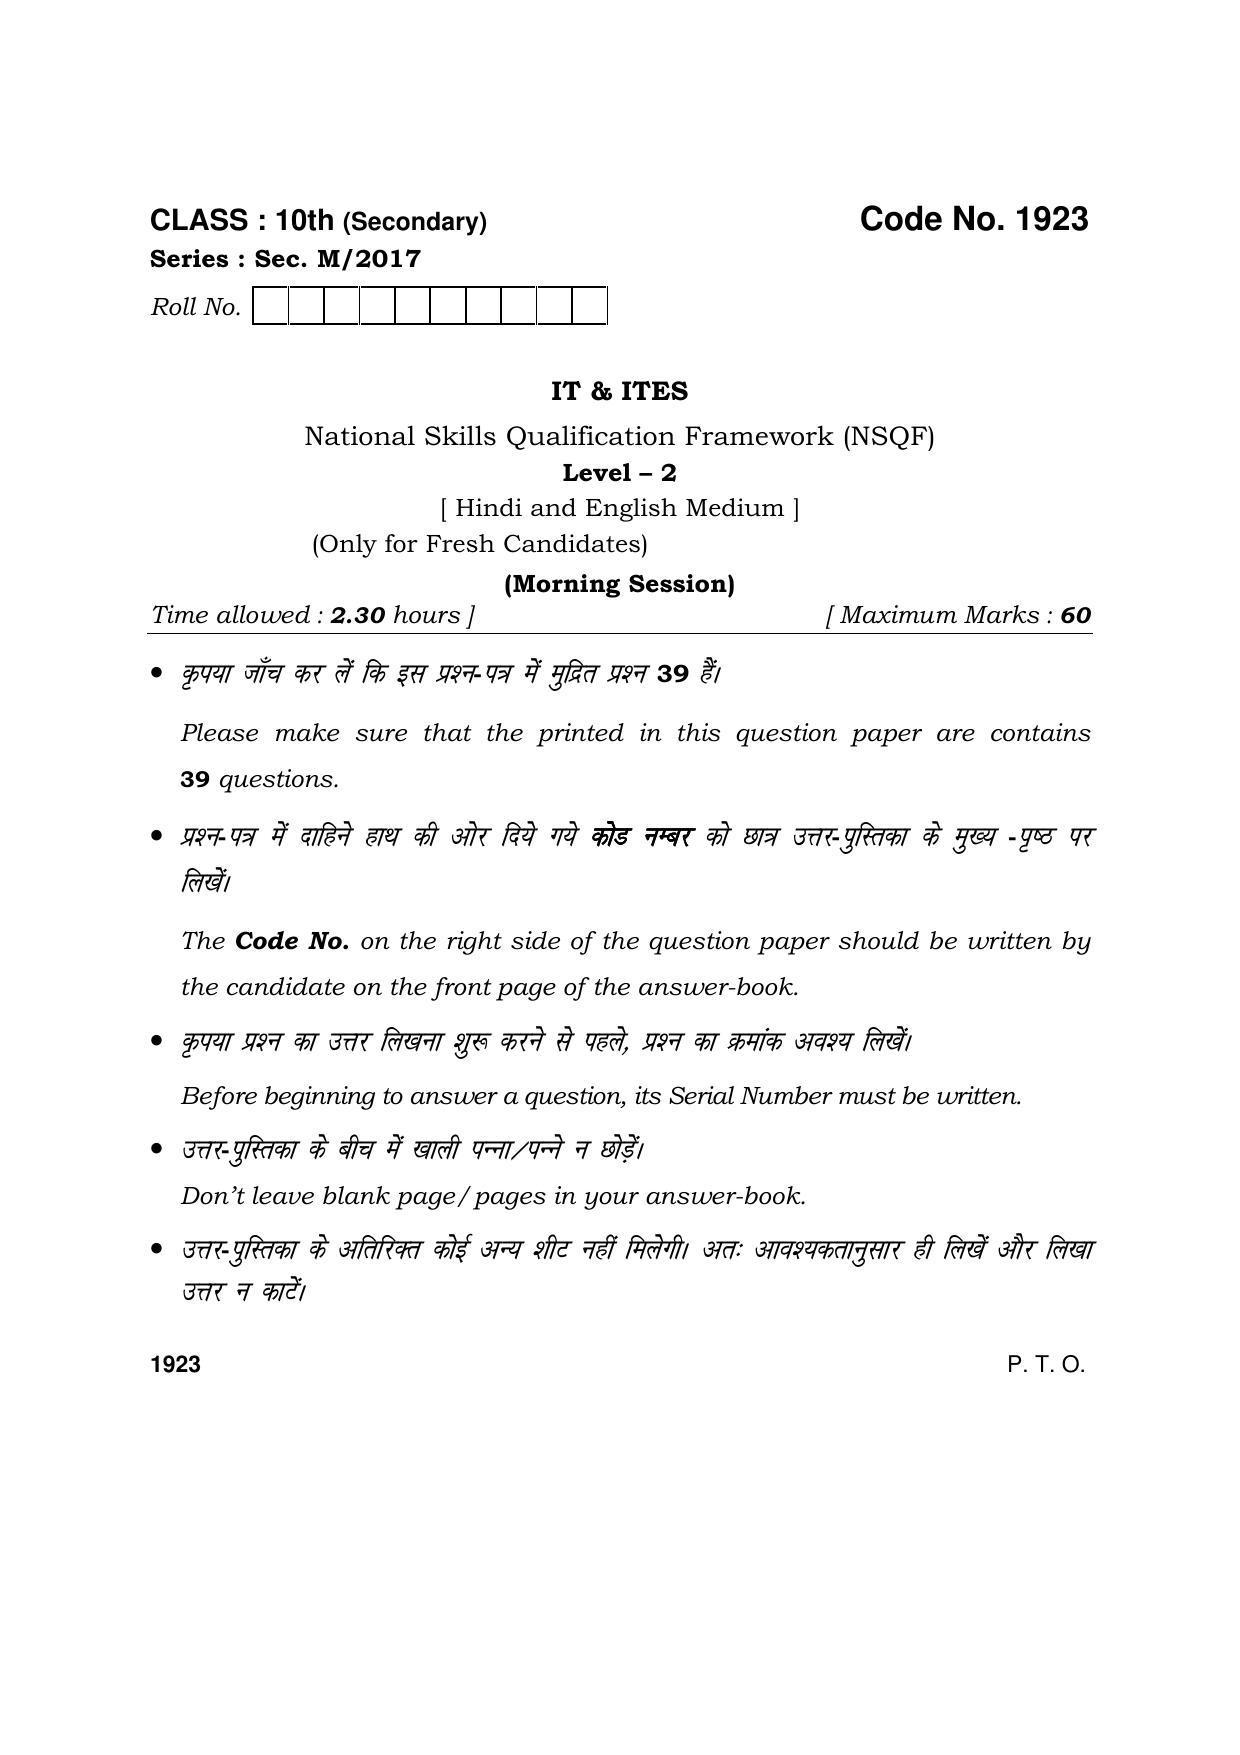 Haryana Board HBSE Class 10 IT & ITES 1923 (Level-2) 2017 Question Paper - Page 1